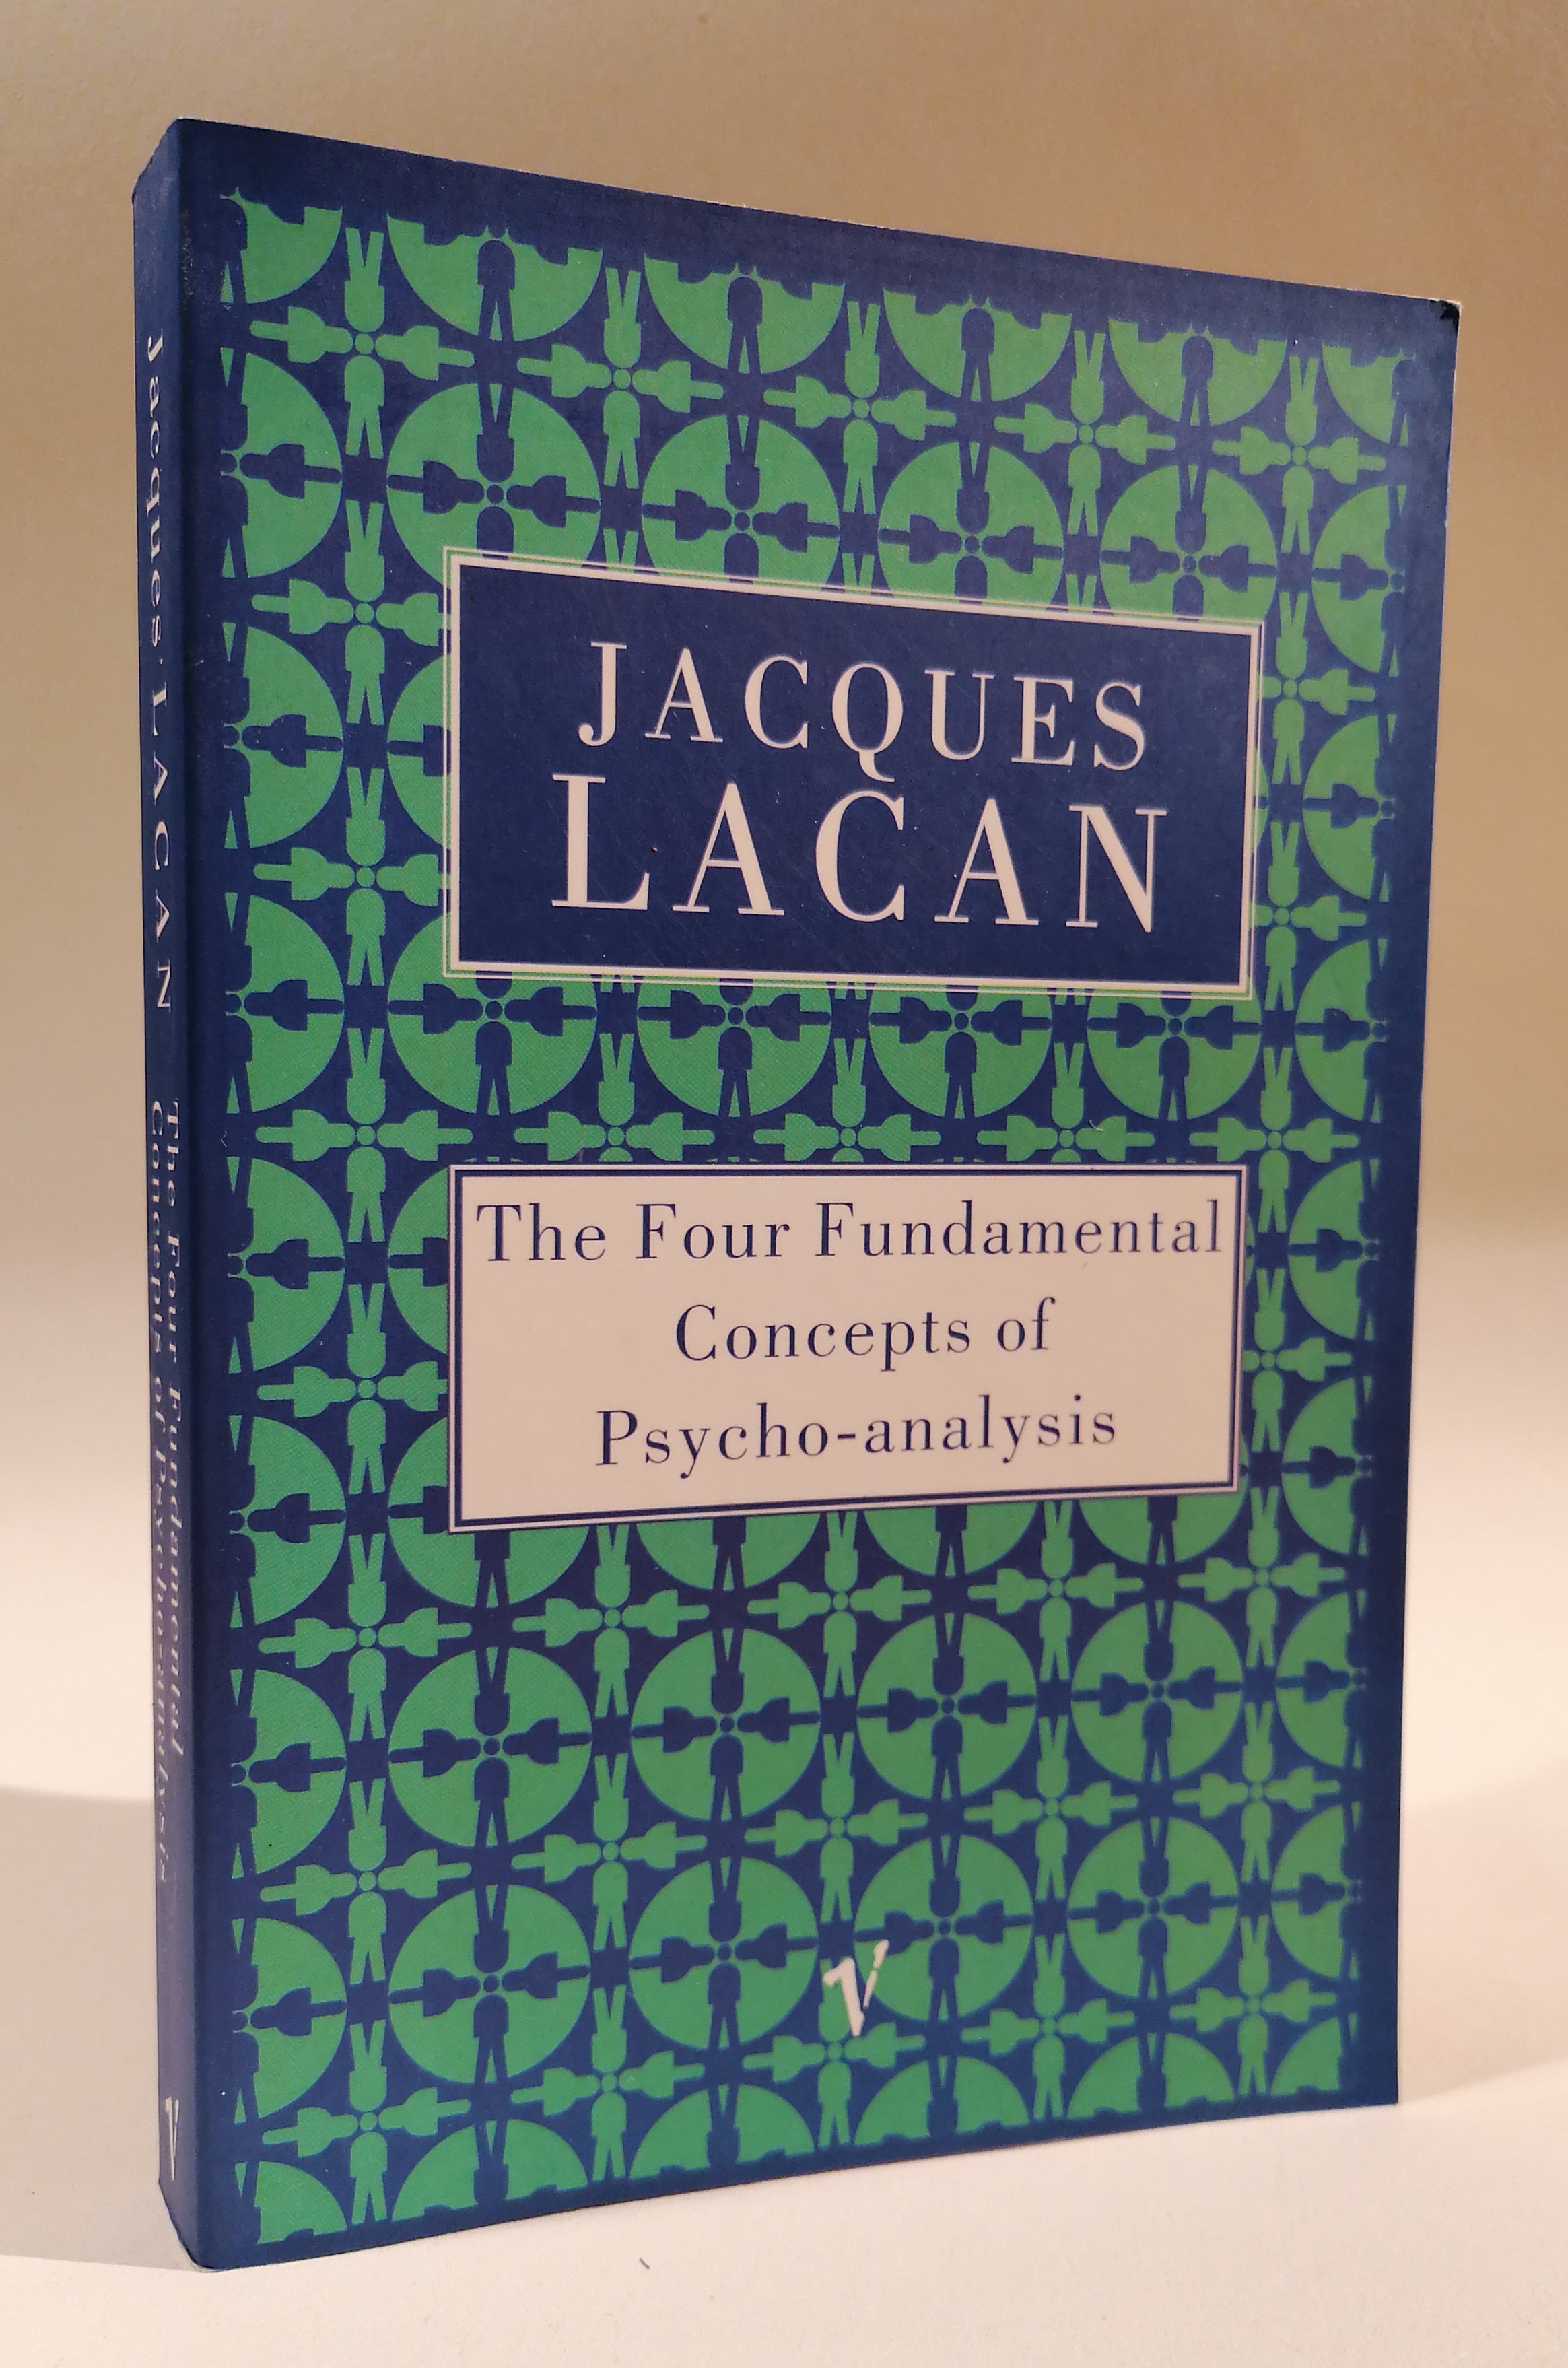 The Four Fundamental Concepts of Psycho-analysis - Lacan, Jacques